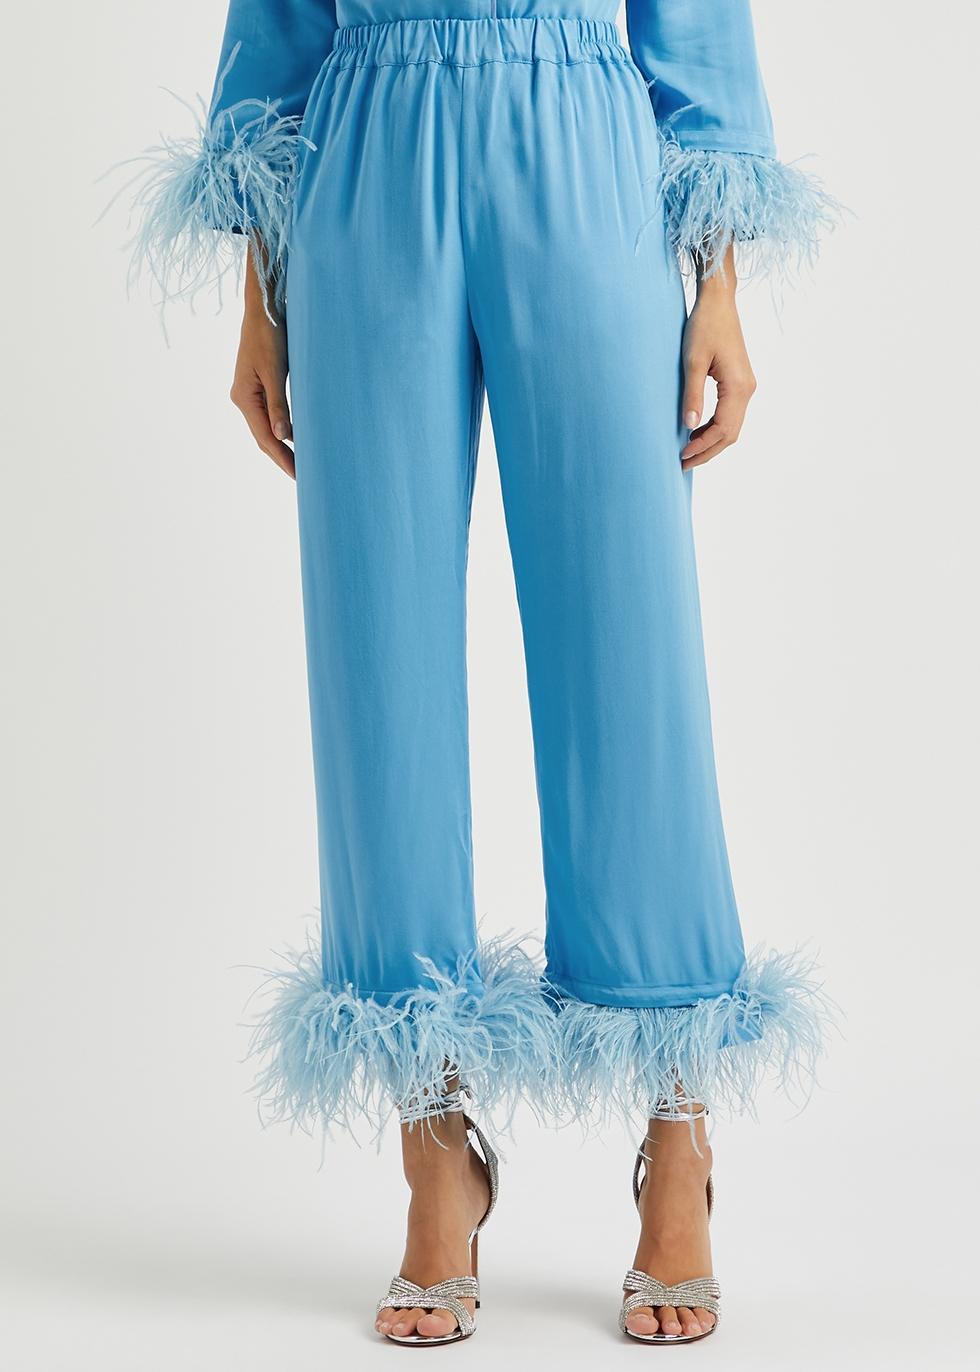 Womens Sleeper blue Feather-Trimmed Party Pyjama Set